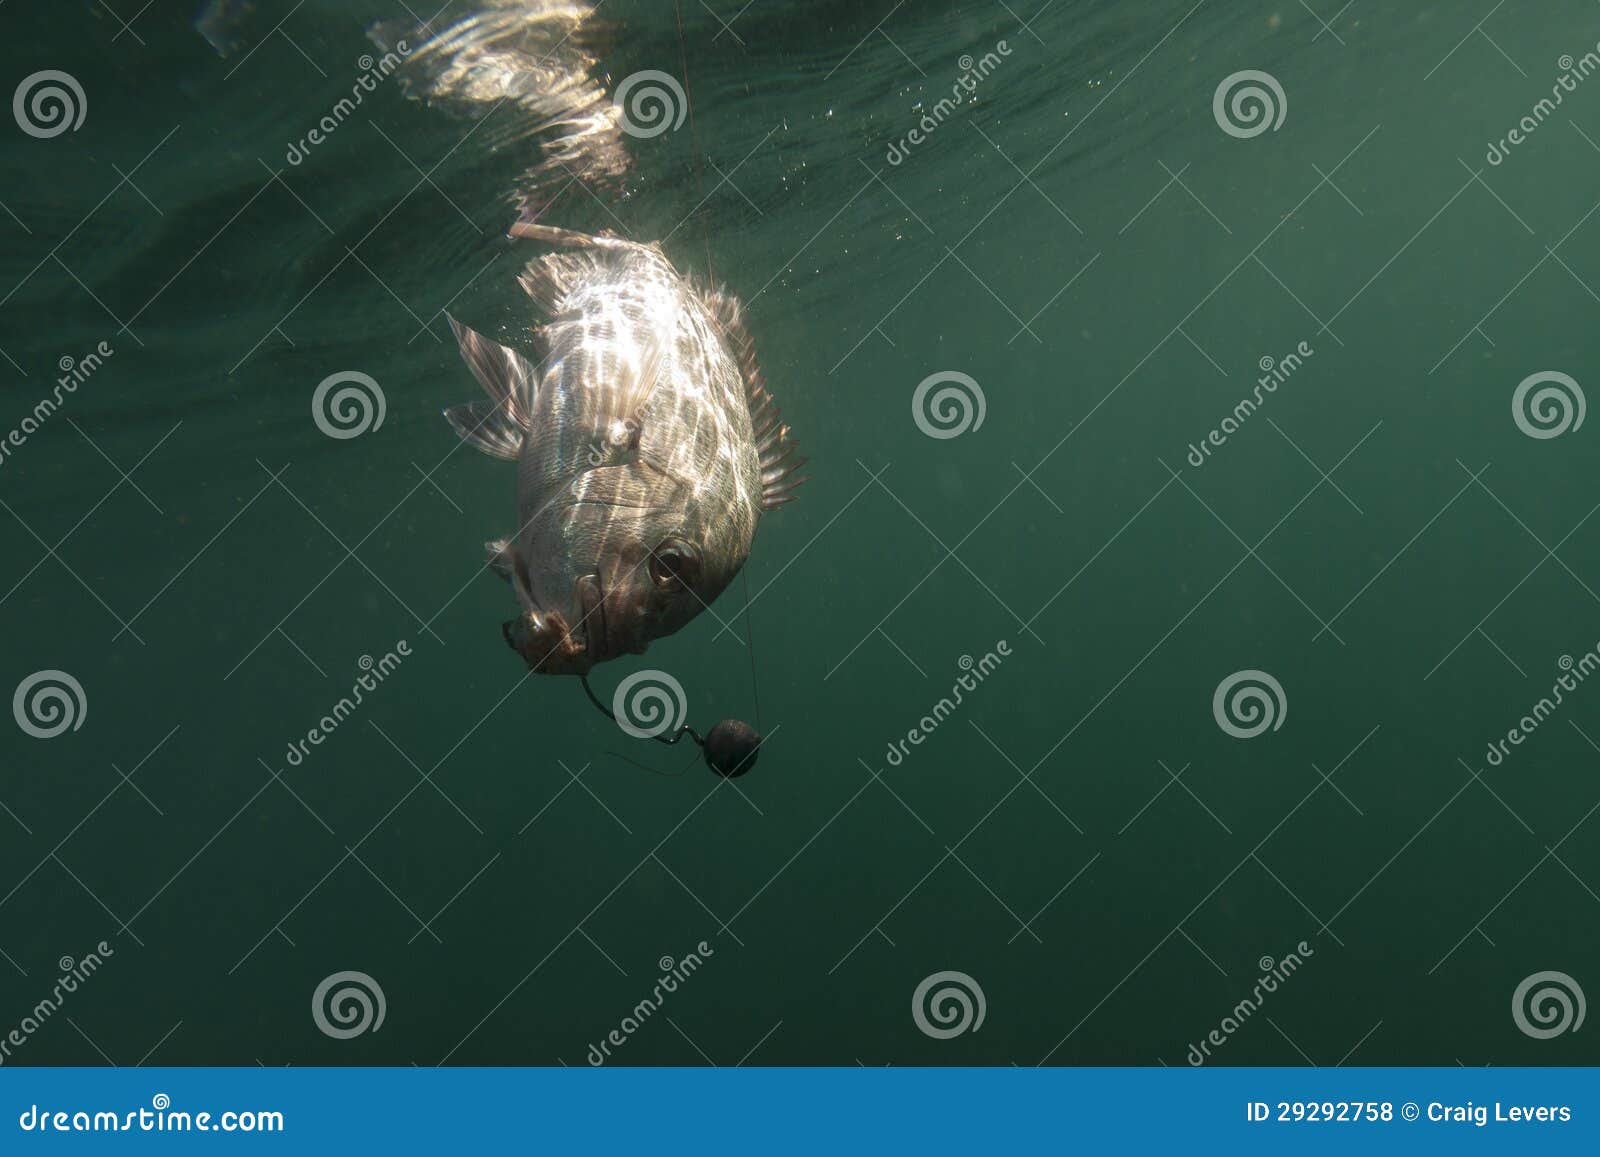 Fish on line stock photo. Image of catch, sinker, line - 29292758